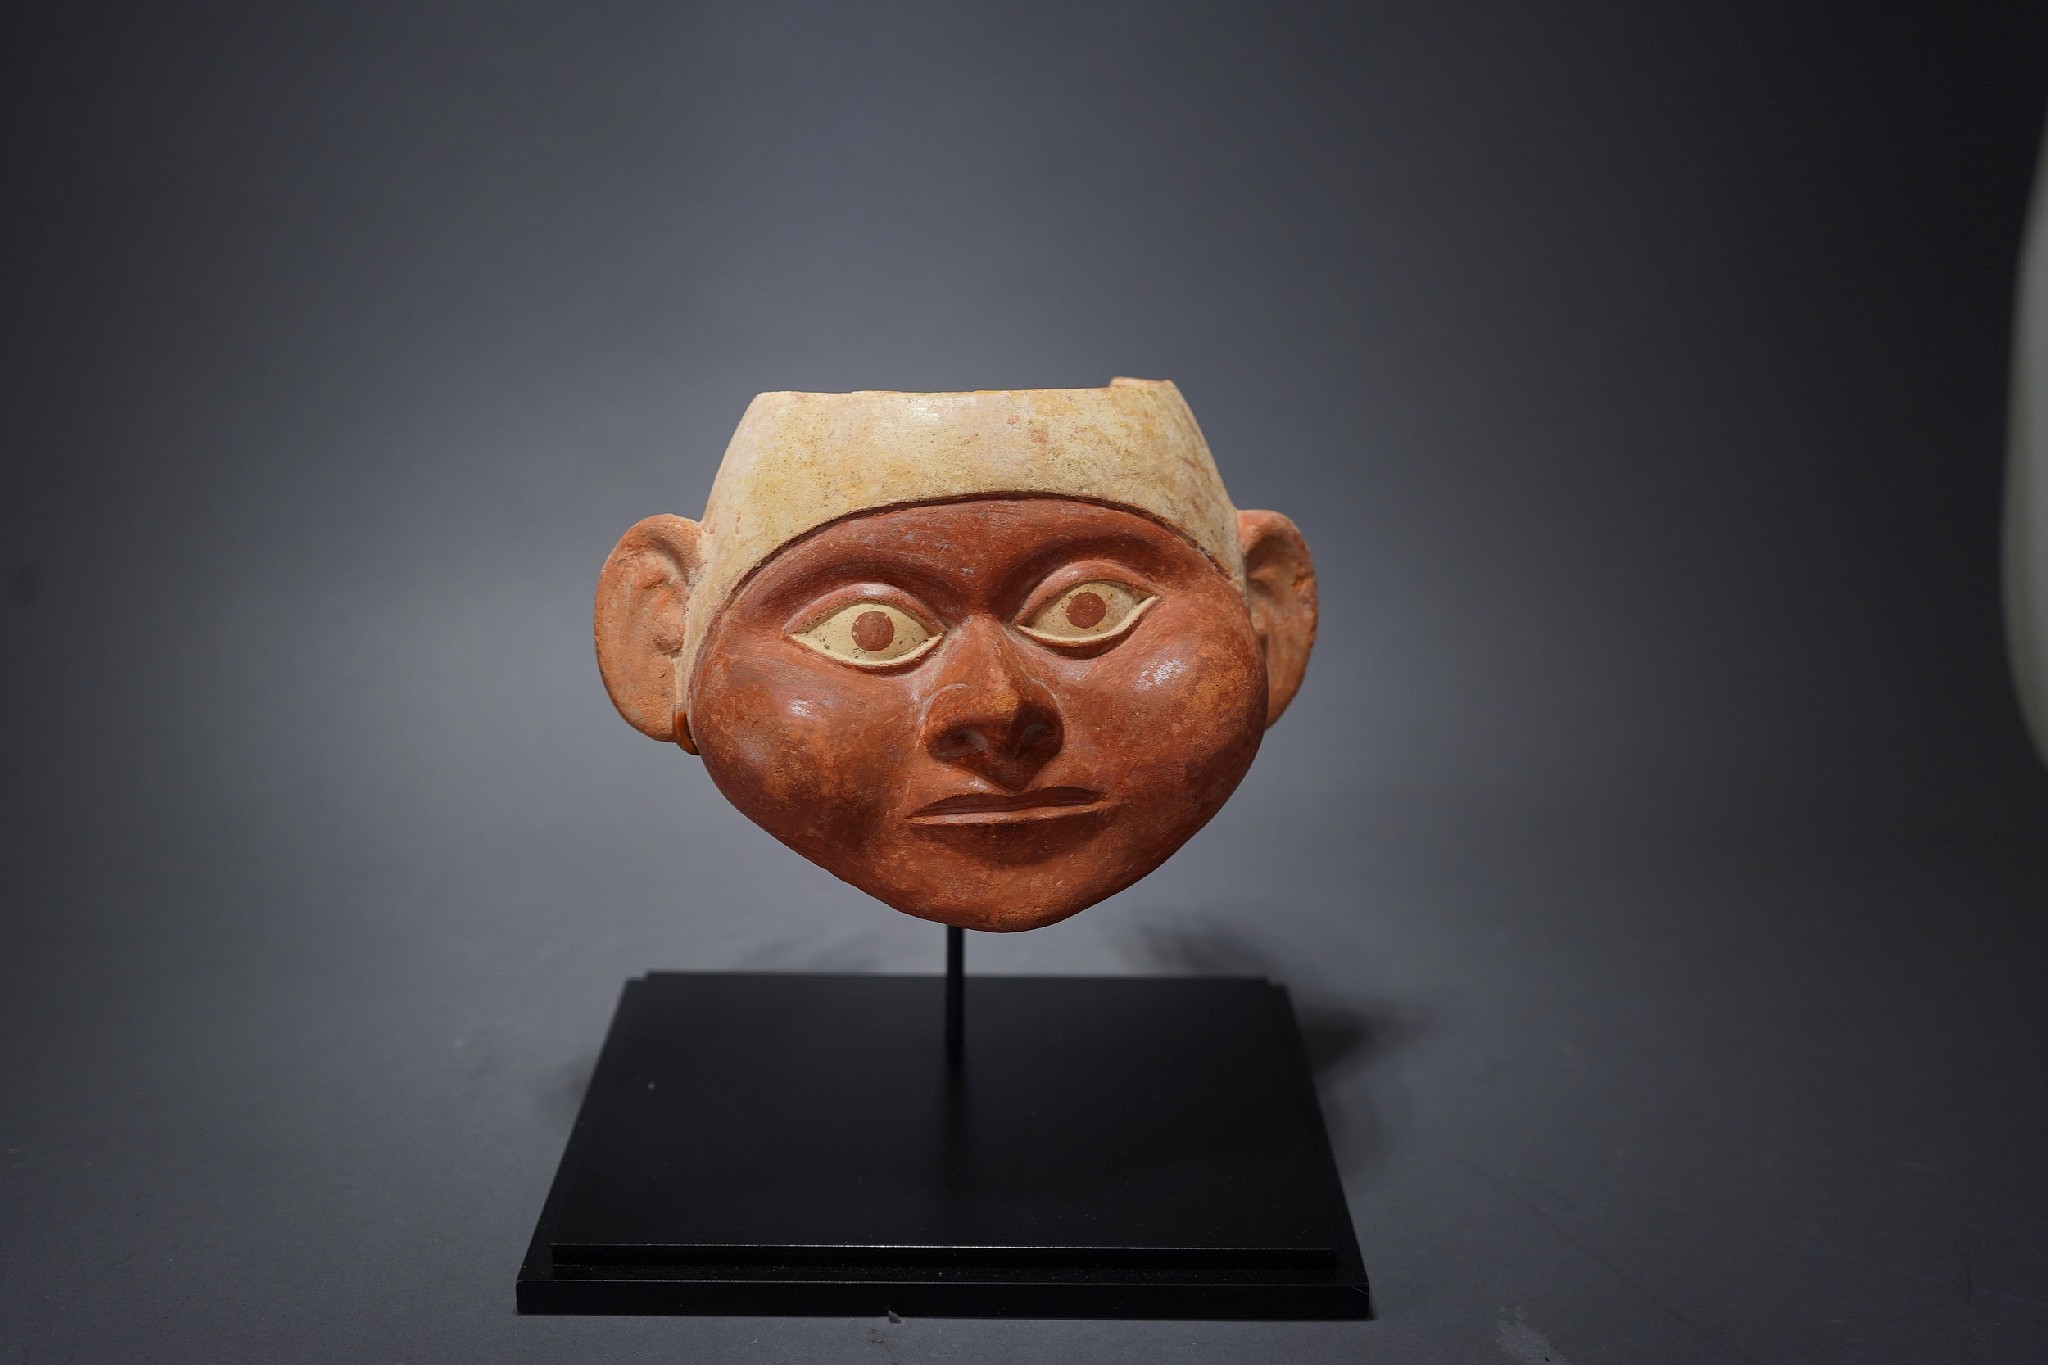 Peru, Moche Ceramic Section to a Portrait Vessel
The portrait masks of the represents the same individual that is illustrated in MOCHE PORTRAITS OF ANCIENT PERU by Christopher Donnan on page 92.  The published version has the exact same facial features, but is older in age.  The Moche are known to have made portraits of the same person throughout different life stages. Ex. collection of Mark Moore, by descent from his father Lee Moore.  Prior to 1970.
Media: Ceramic
Dimensions: Height: 5 1/2" x Width: 7 1/4"
Price Upon Request
p2045